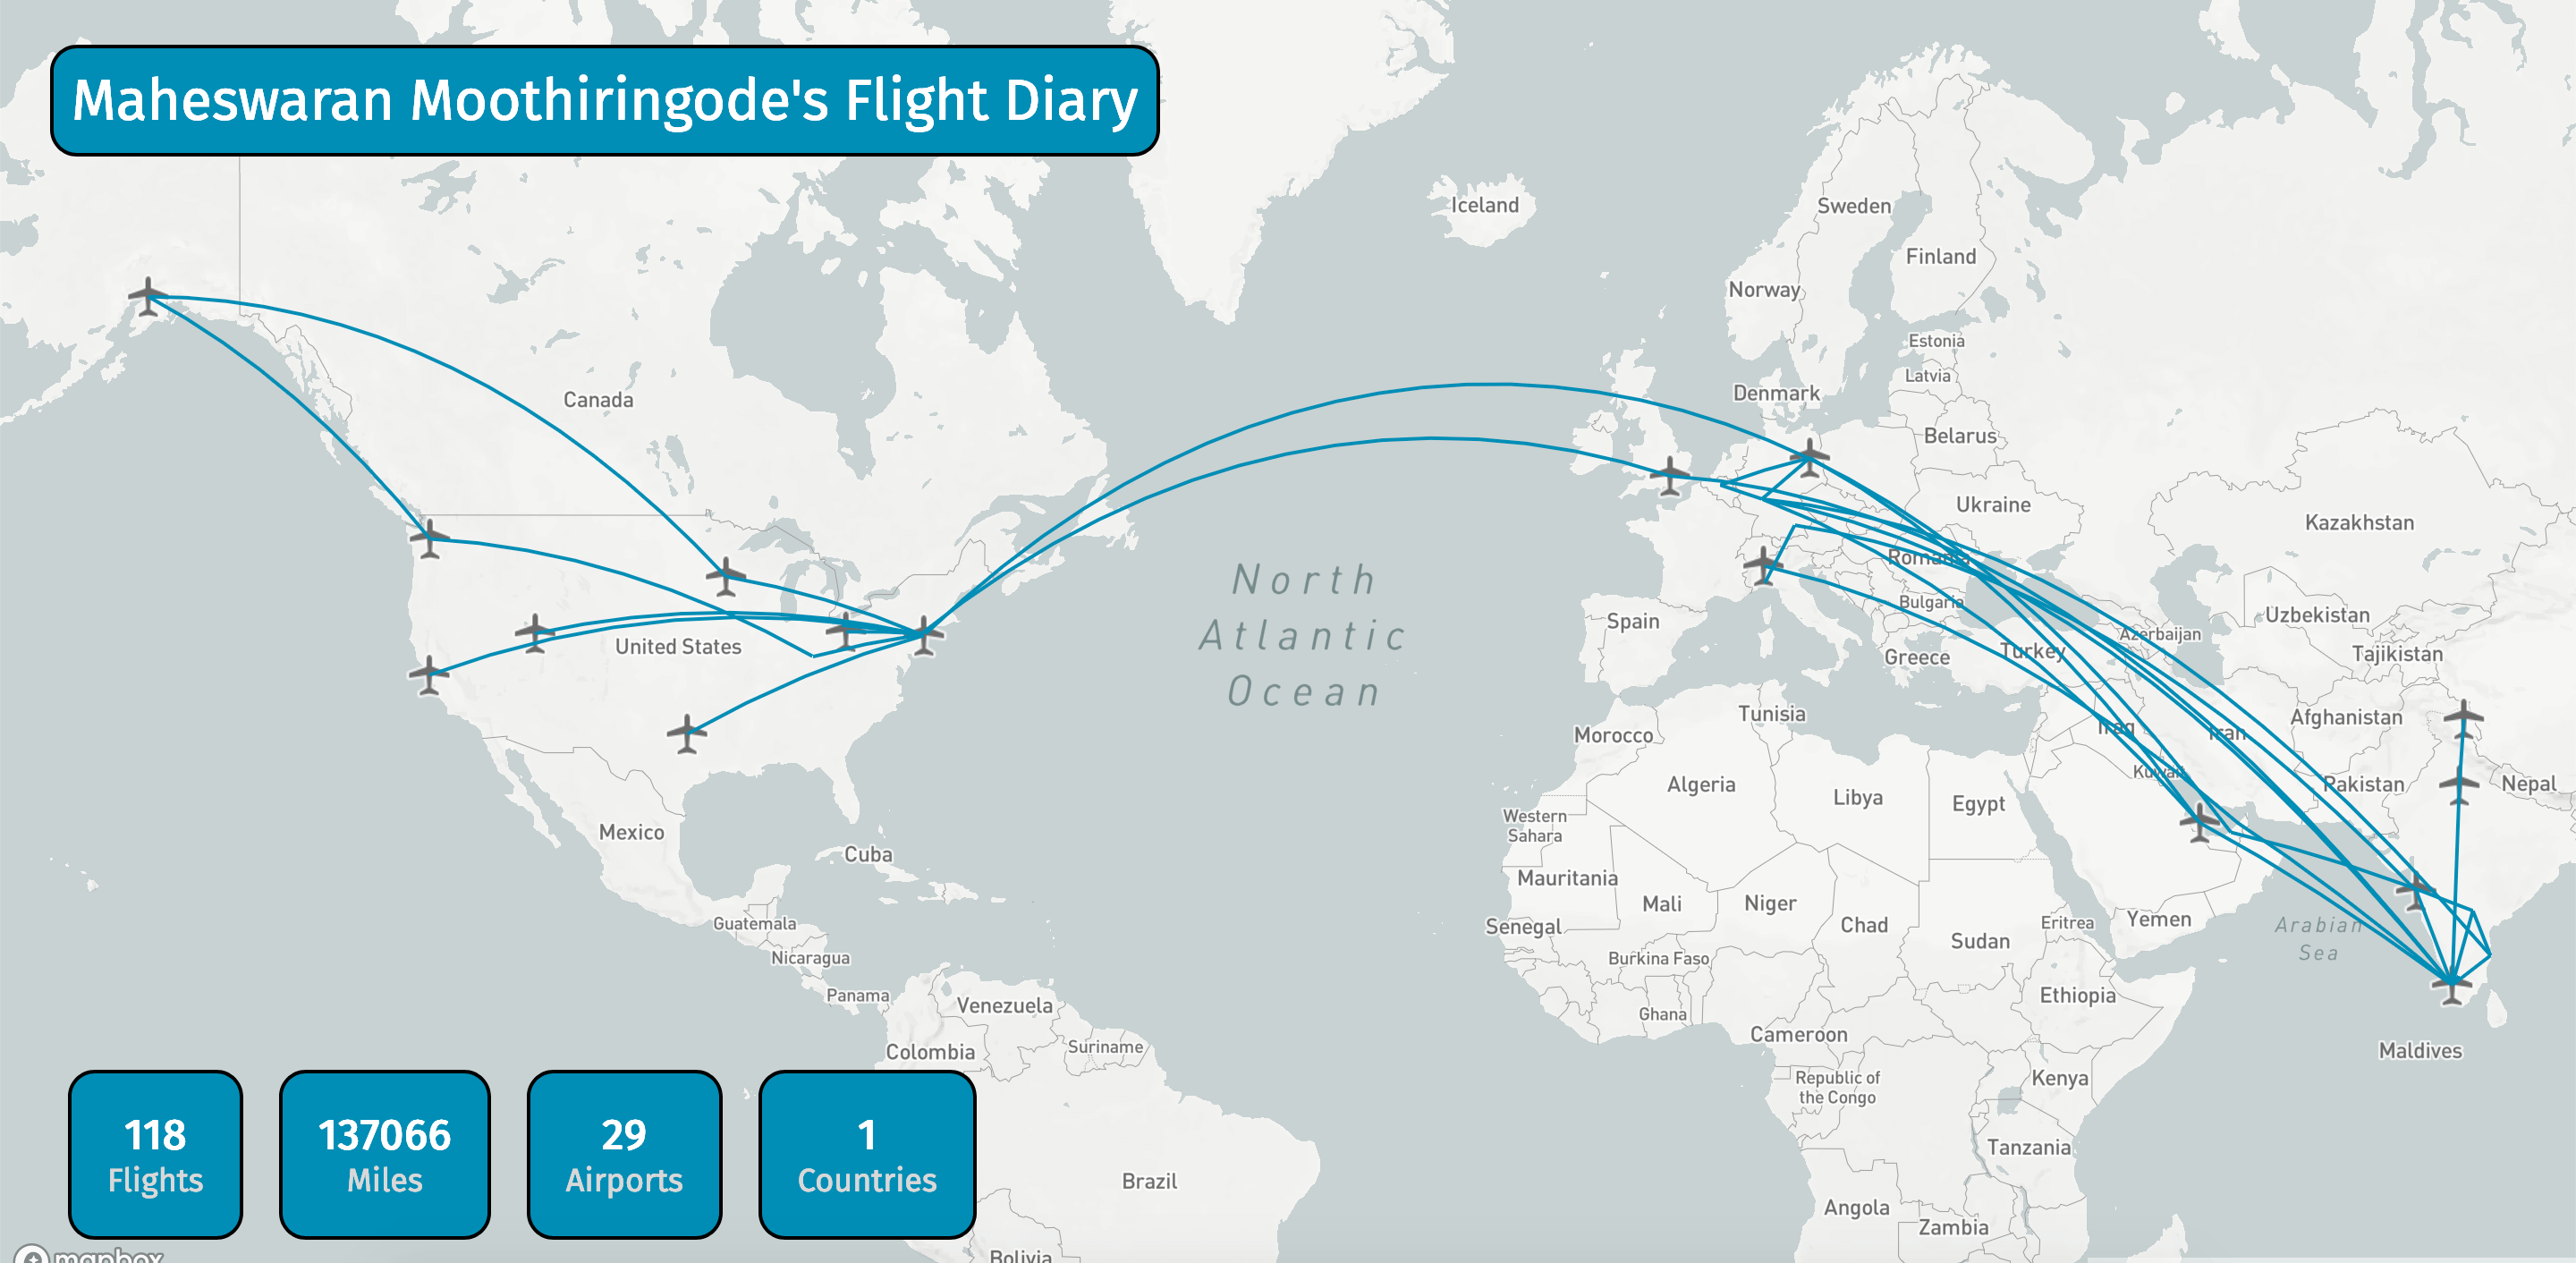 image of all flights i took over a world map